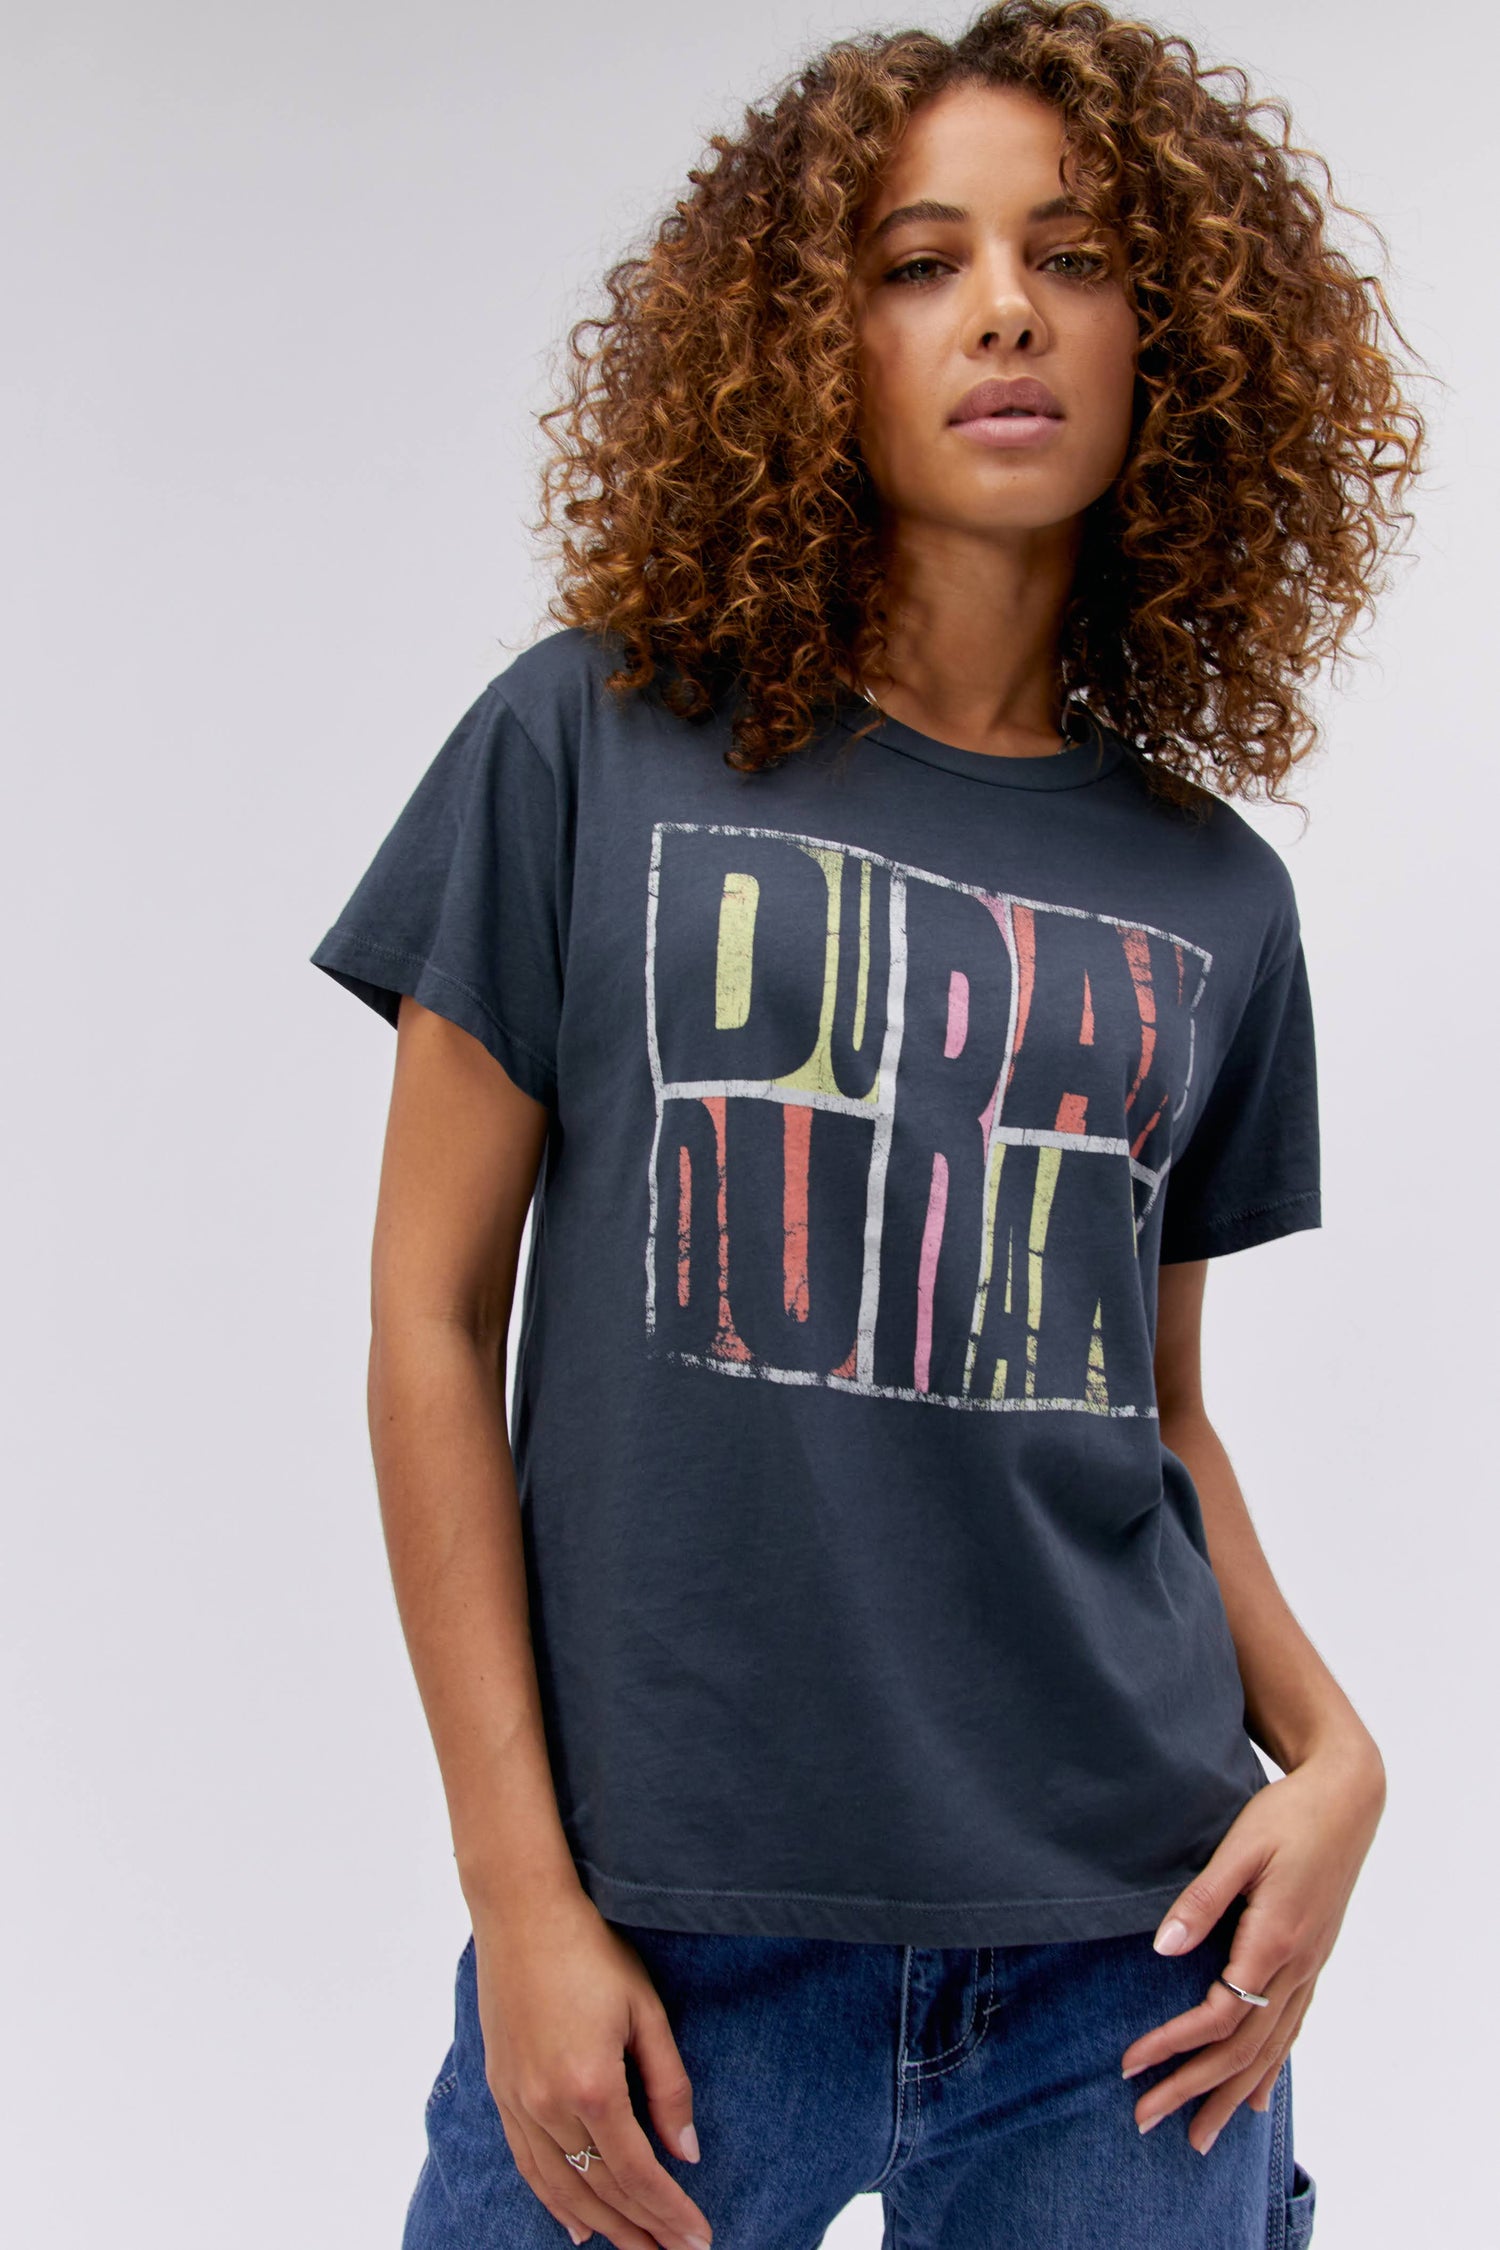 A curly-haired model featuring a black tee stamped with 'Duran Duran' in front and 'abstract', 'idealist', and 'romantic' at the back.